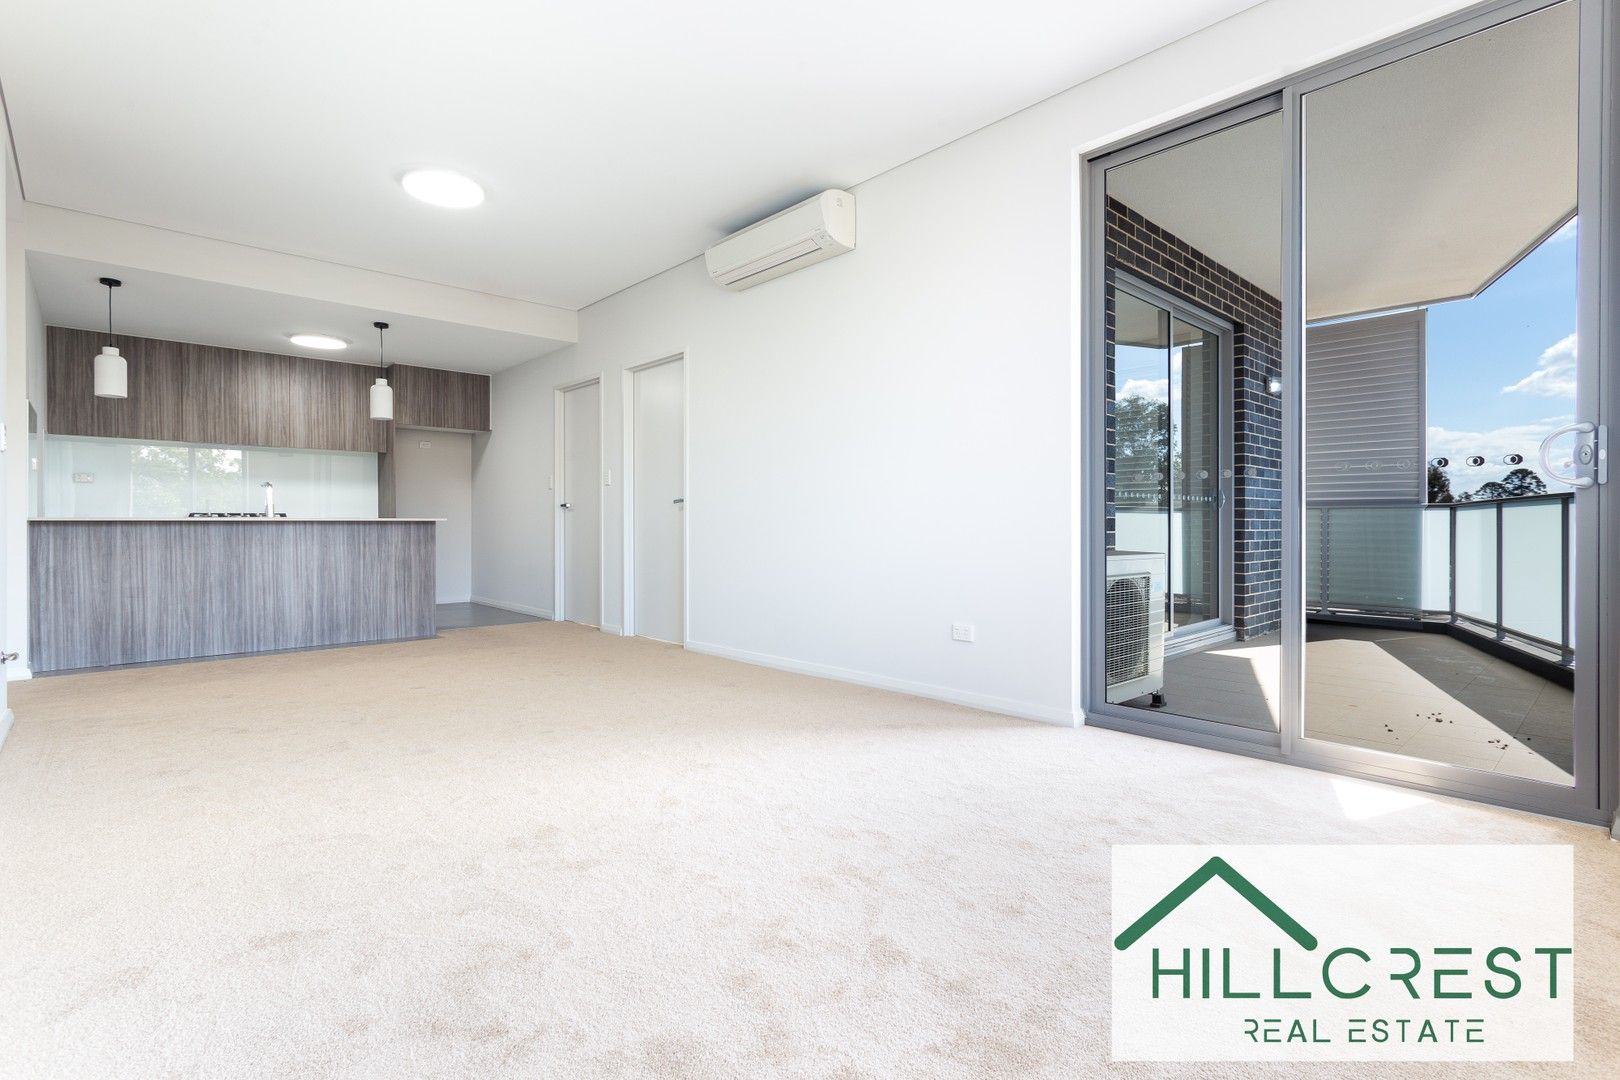 1-3 Adonis Ave, Rouse Hill NSW 2155, Image 0